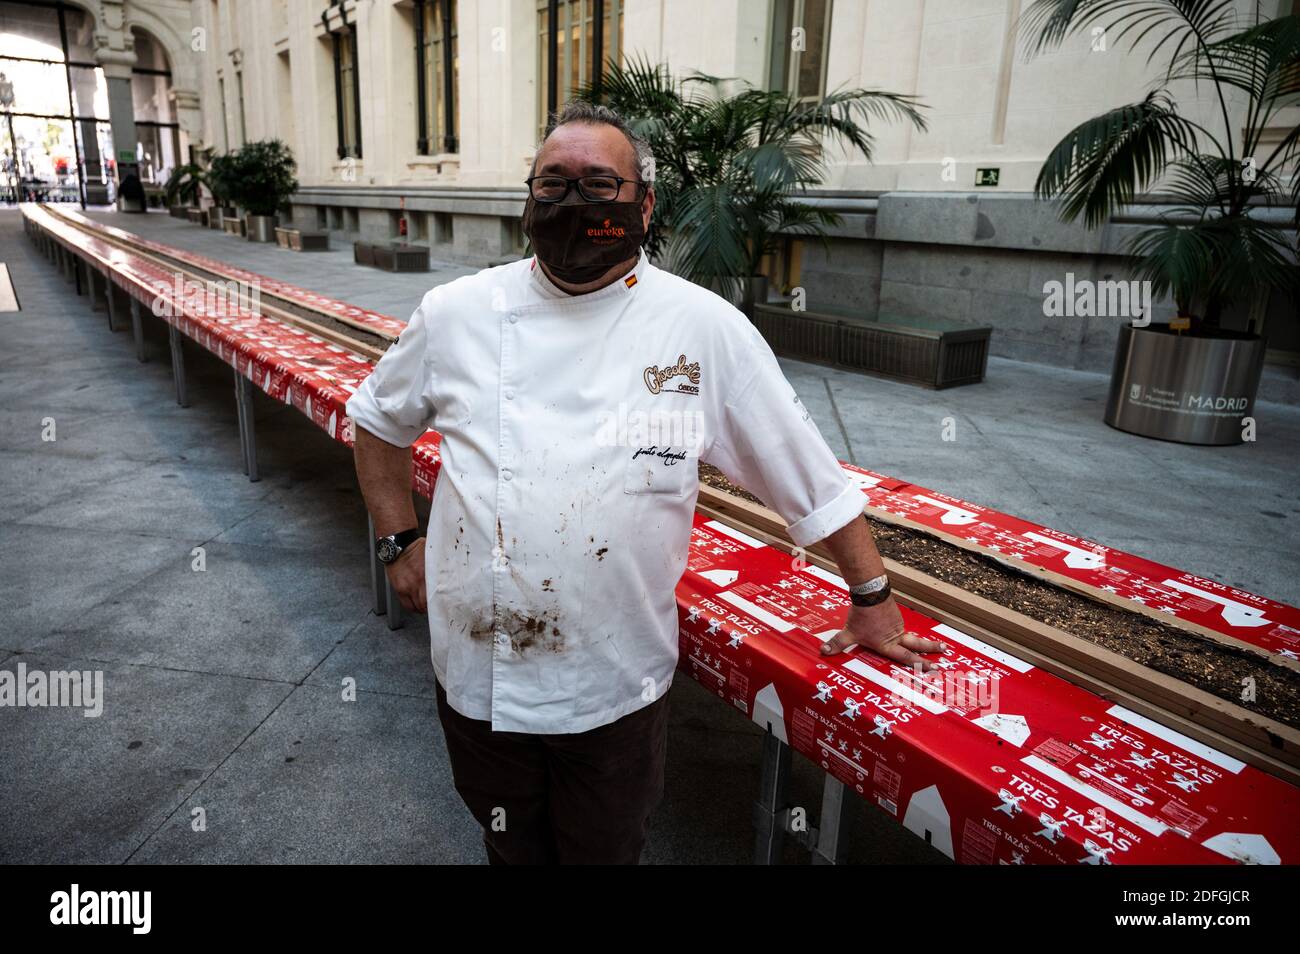 Madrid, Spain. 04th Dec, 2020. The master chocolatier Justo Almendrote, of Spain's oldest chocolate factory La Colonial, posing with the world's largest chocolate almond nougat, known in Spanish as 'Turron', with 50 meter of length (164 foot). Two hundred kilos of chocolate, 100 liters of cream, 90 kilos of almonds and 9 hours to make it, which will be cut into thousands of tablets, will be sold to the public and the proceeds will go to social purposes of the Fundacion Esperanza y Alegria. 'Turron' is a typical Christmas sweet very consumed in Spain. Credit: Marcos del Mazo/Alamy Live News Stock Photo